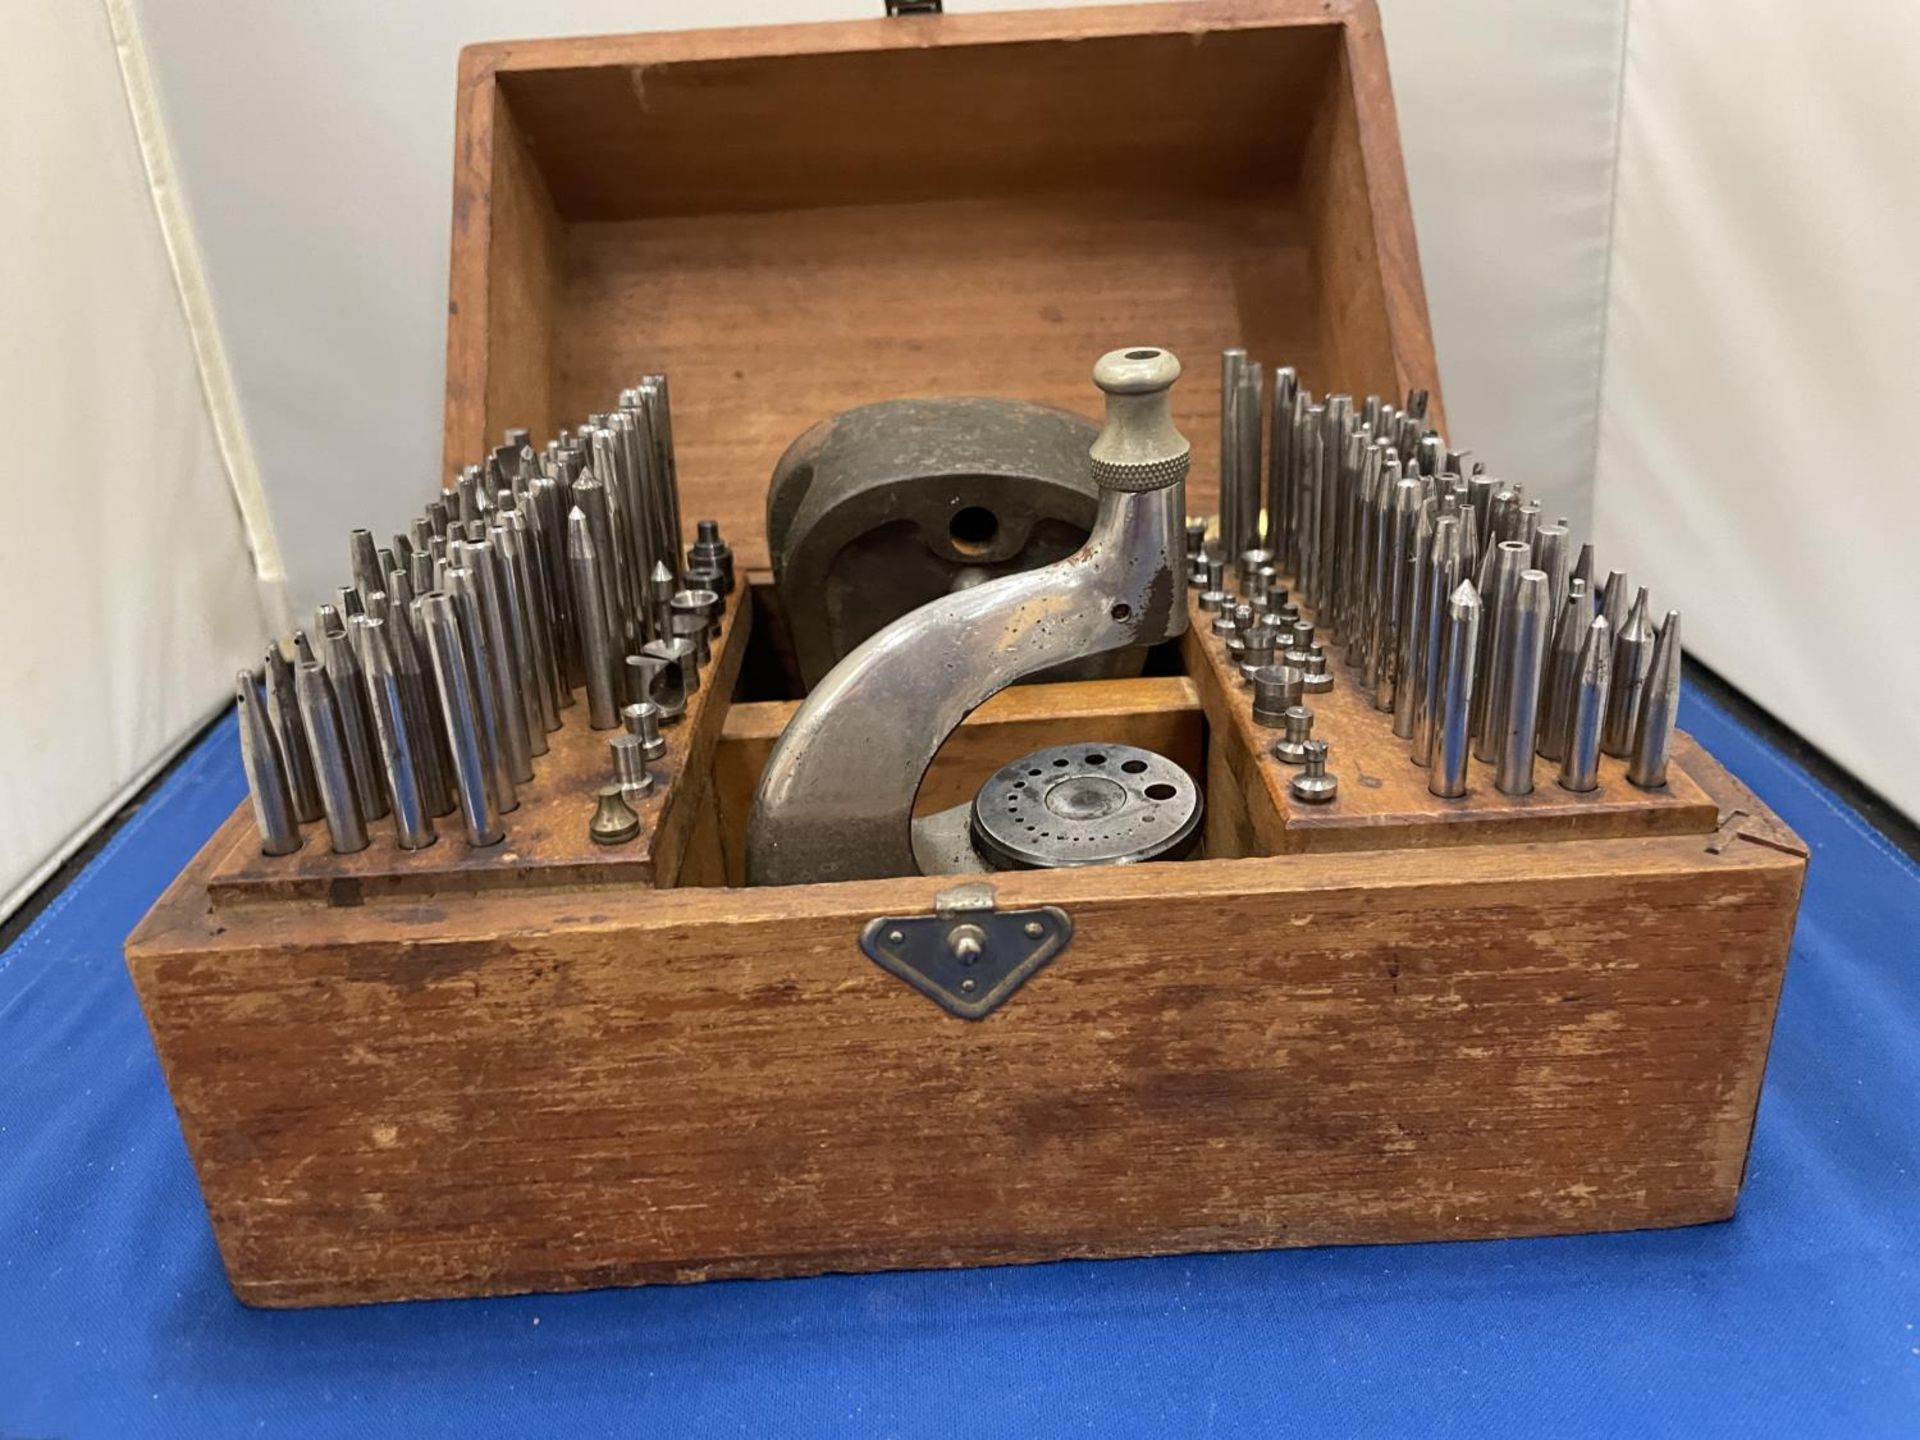 A BOLEY WATCHMAKERS RIVETING AND STAKING TOOLS (COMPLETE SET) IN ORIGINAL WOODEN BOX - Image 5 of 14